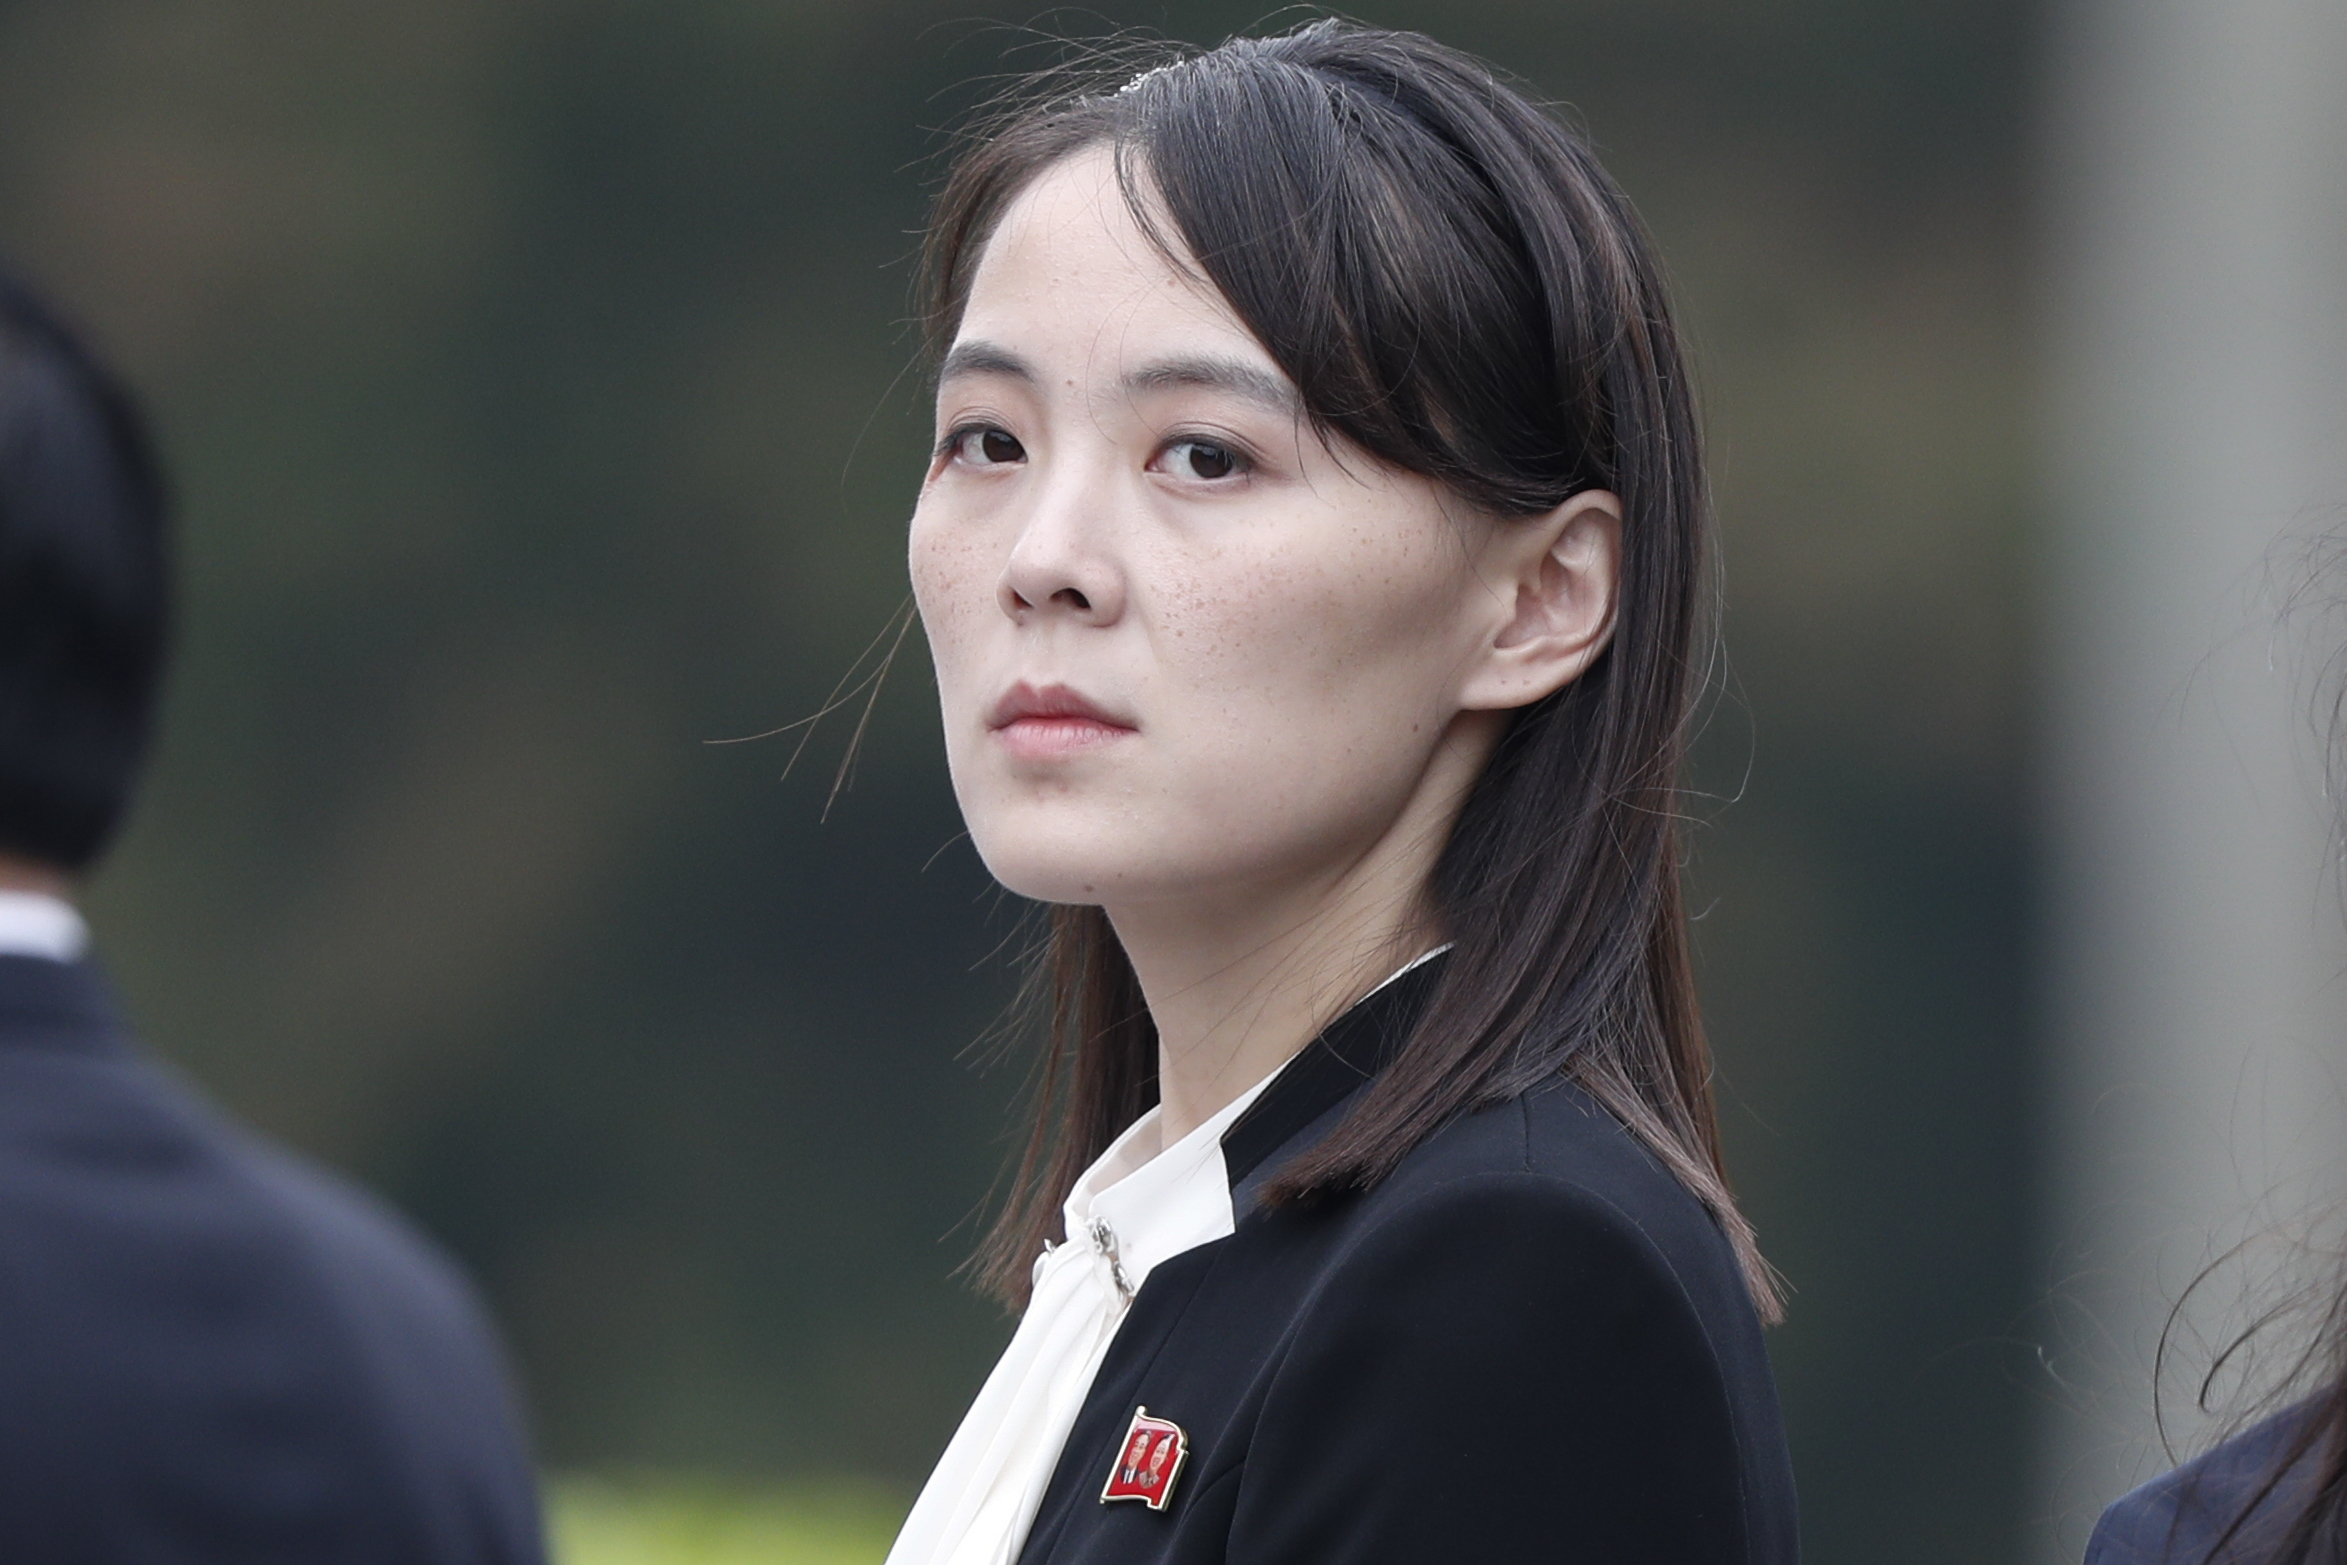 Kim Yo Jong, sister of North Korea's leader Kim Jong Un, attends wreath laying ceremony at Ho Chi Minh Mausoleum in Hanoi, March 2, 2019. (Photo by JORGE SILVA / POOL / AFP)